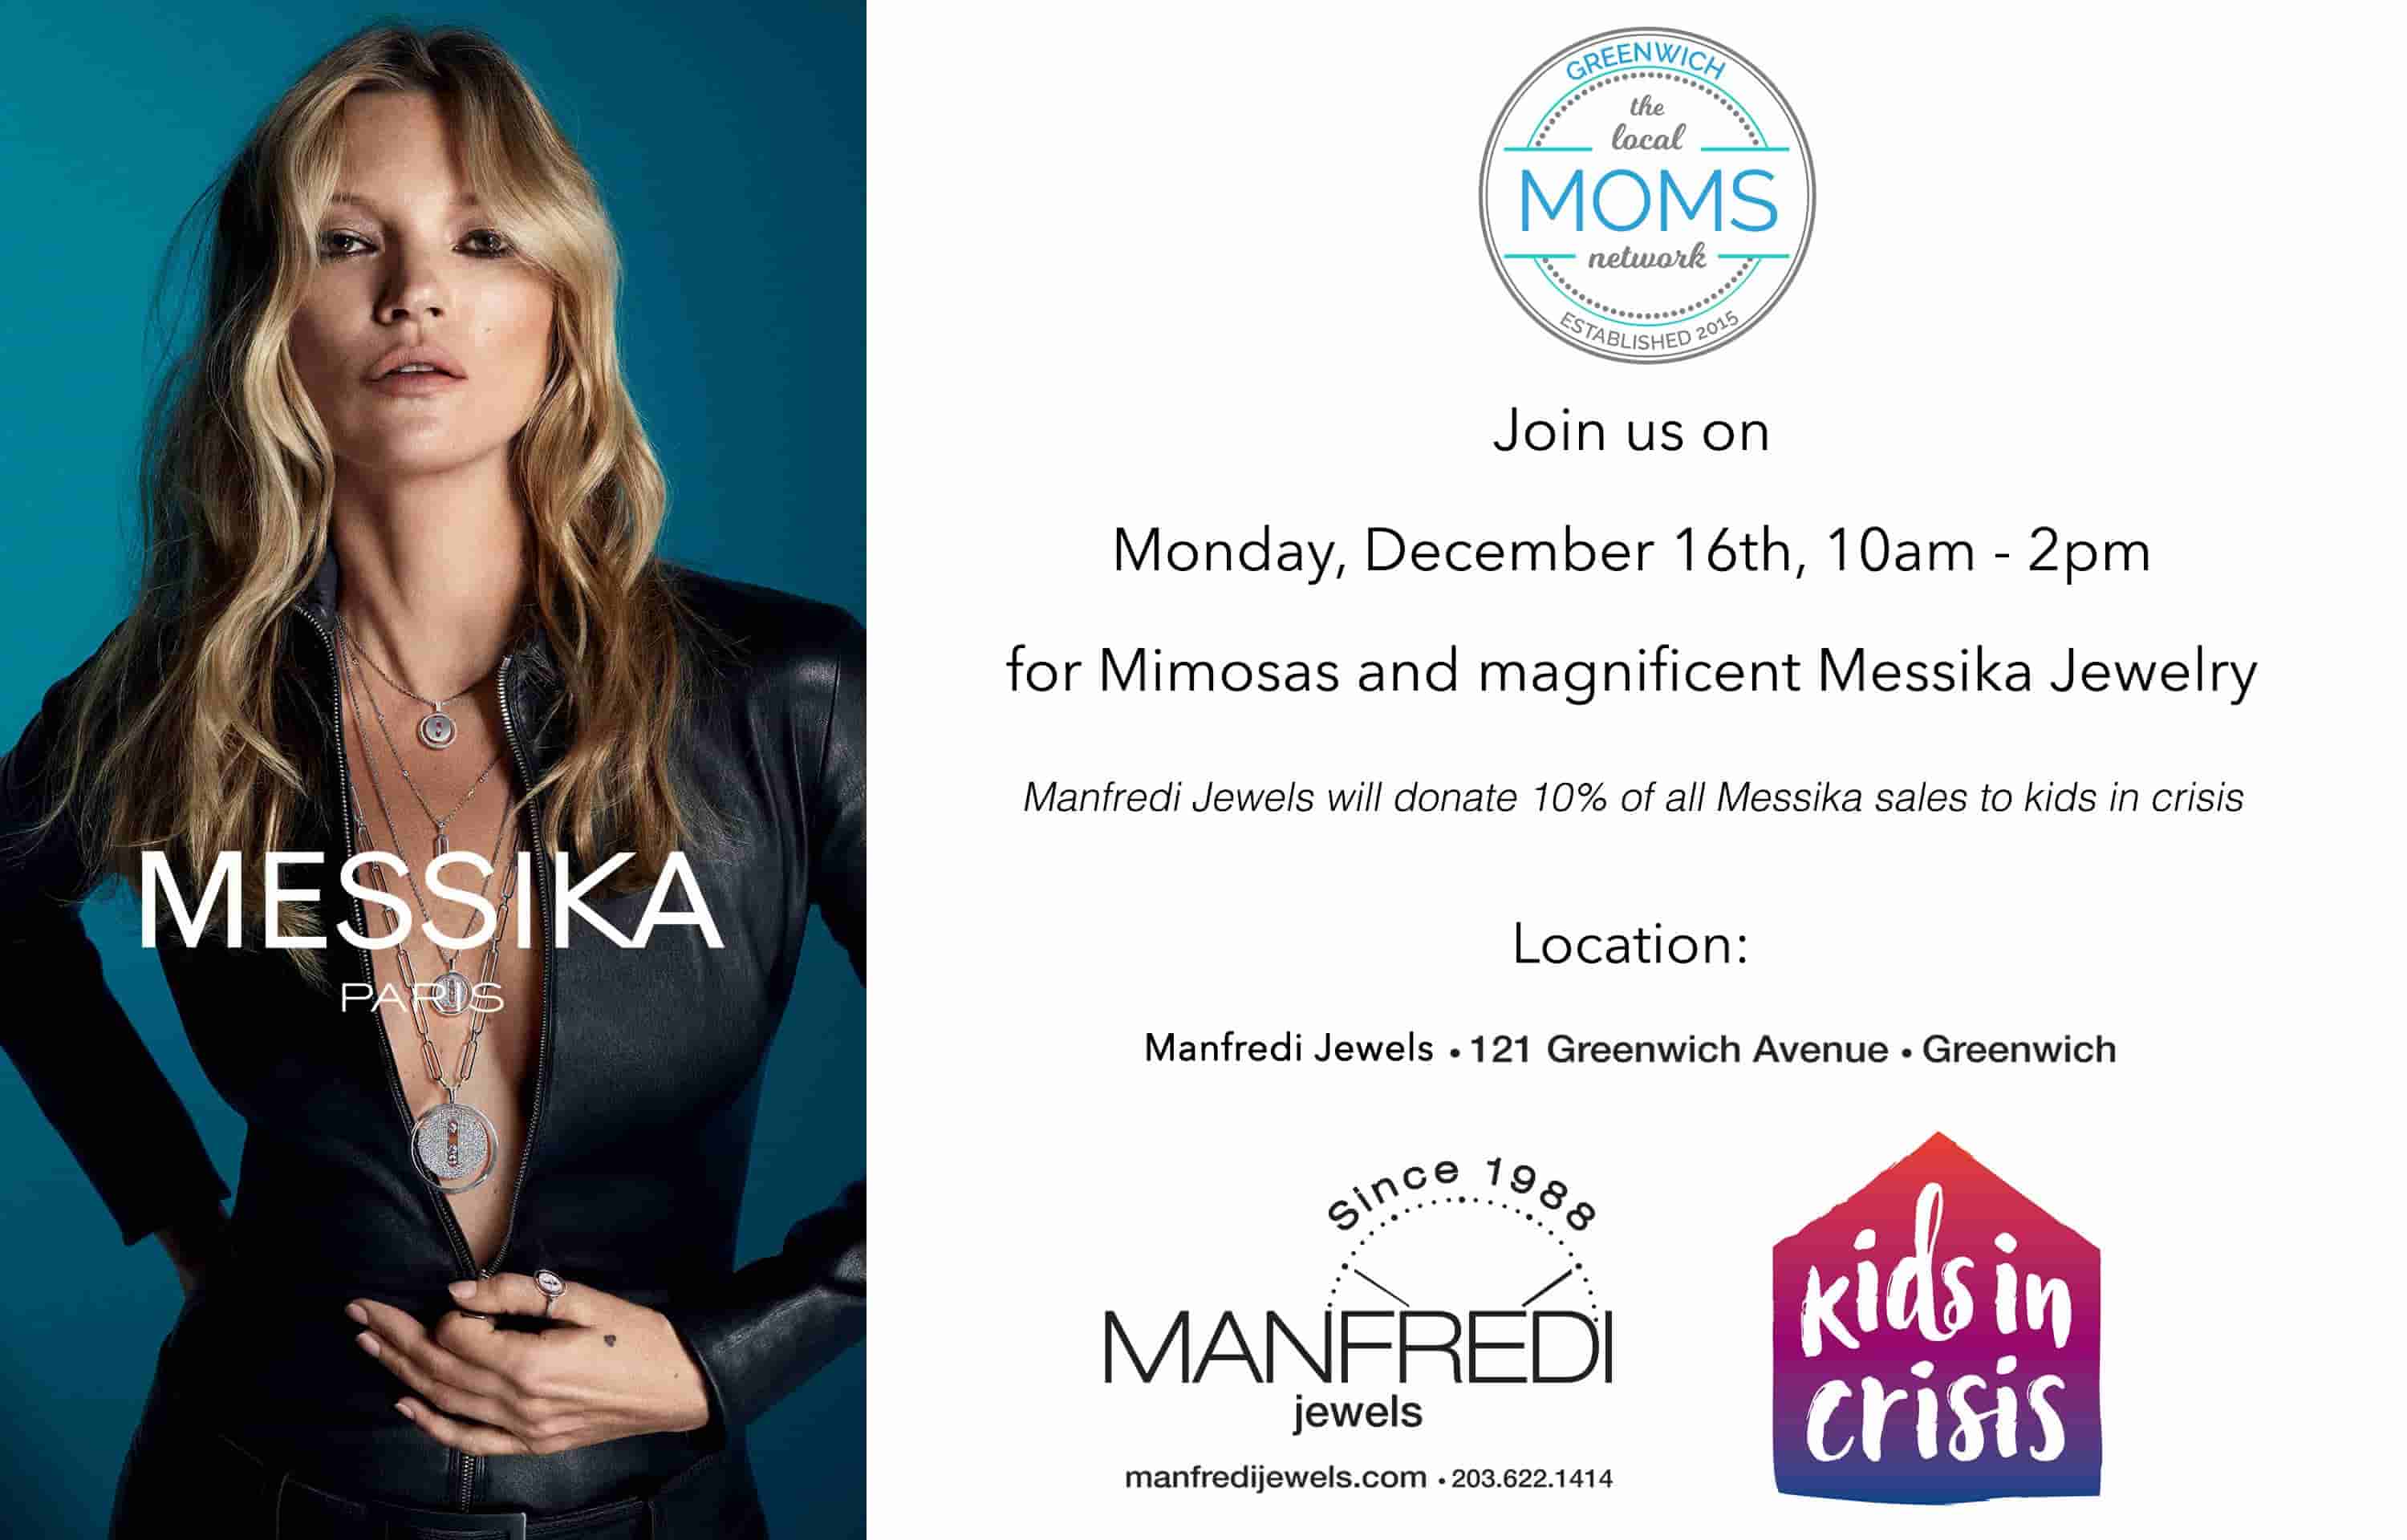 Join us for Mimosas and magnificent Messika Jewelry